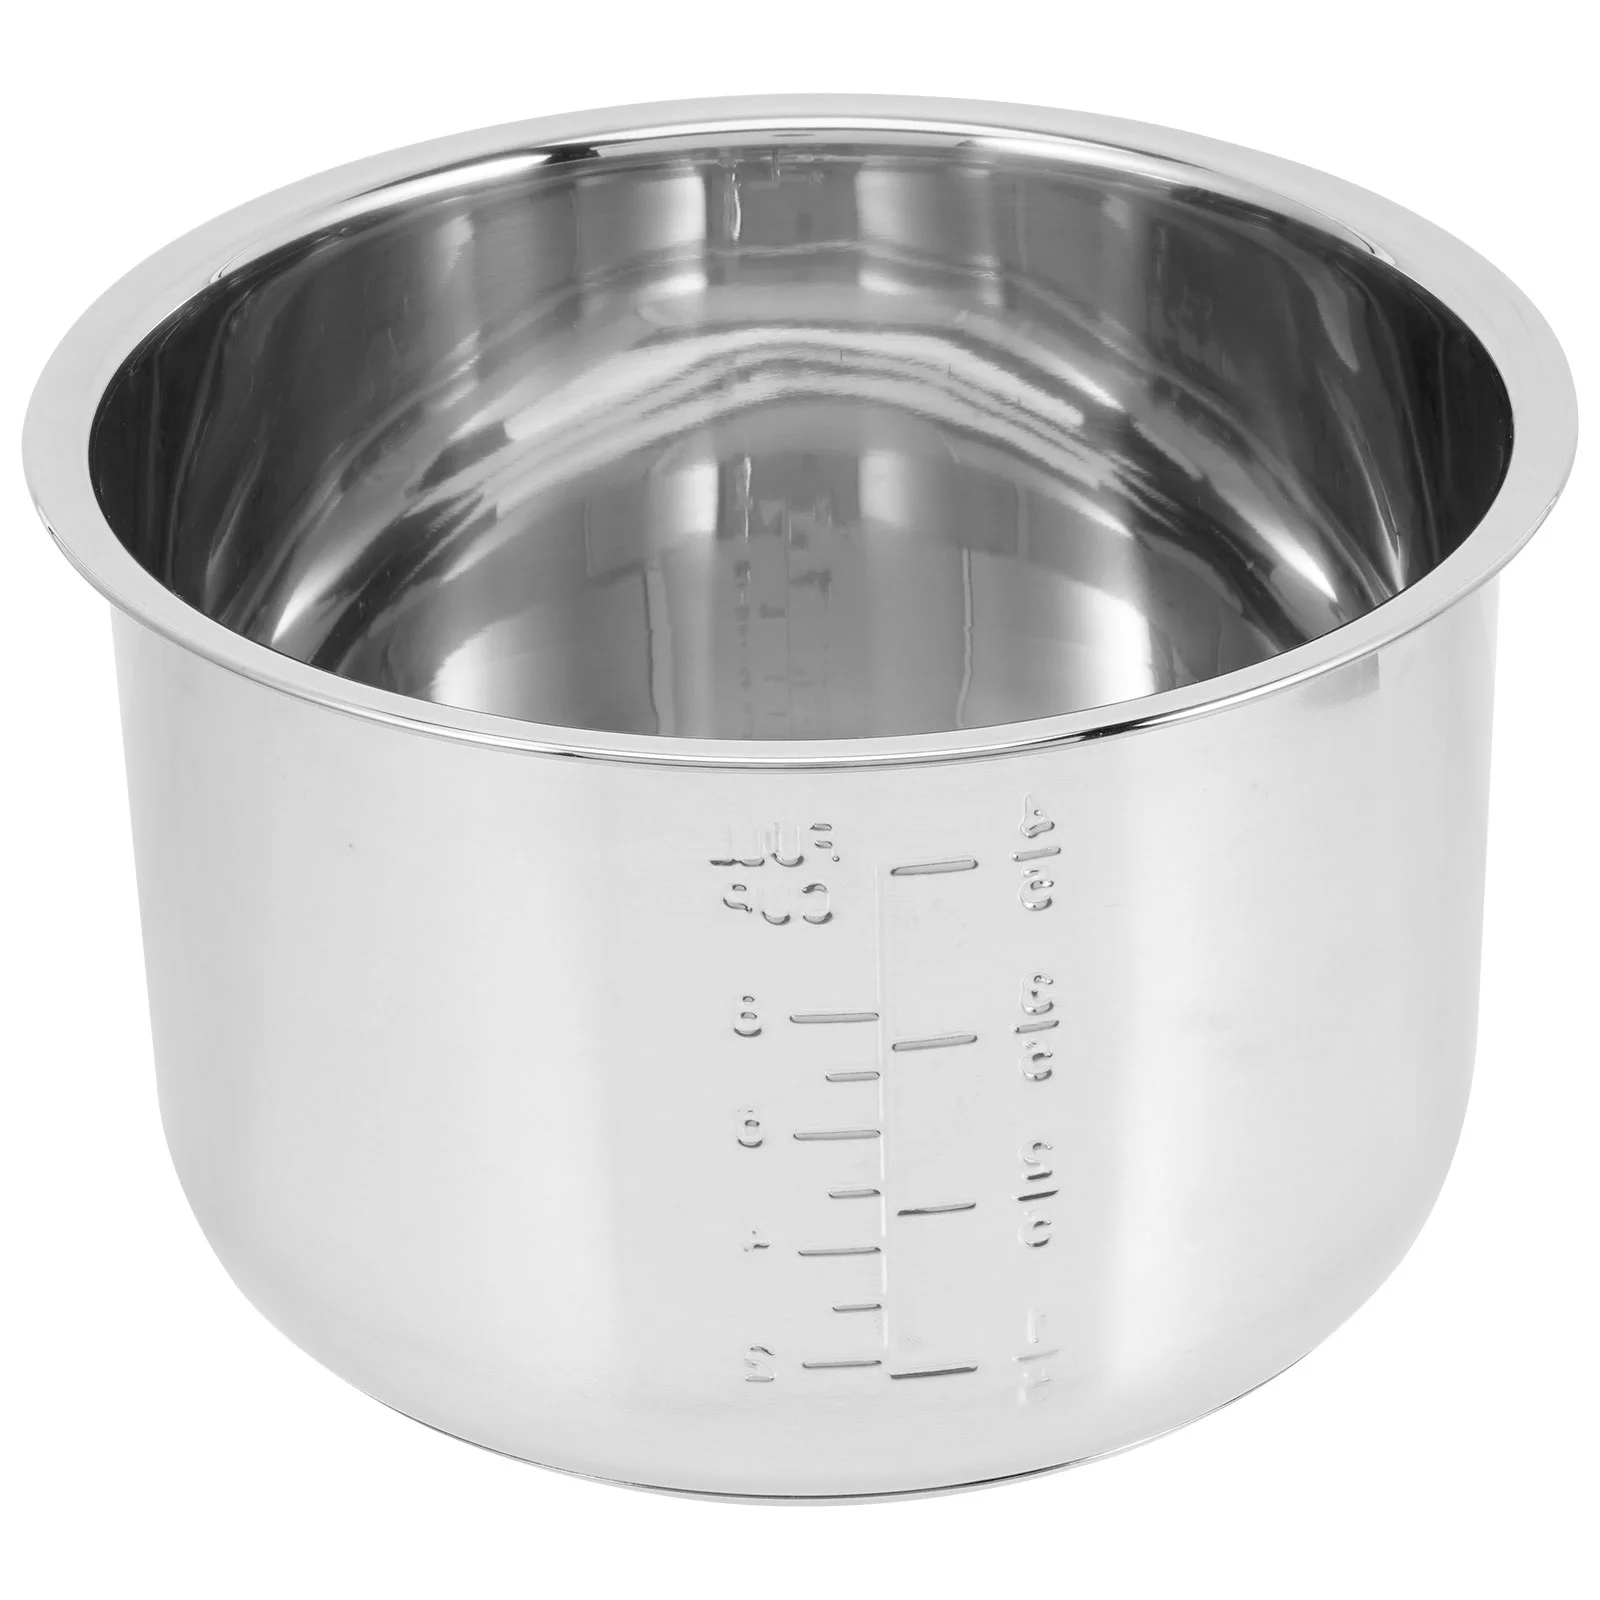 

Replacement Inner Cooking Pot Stainless Steel Non Stick Rice Cooker Pot 8.66 Diameter X 5.19 High